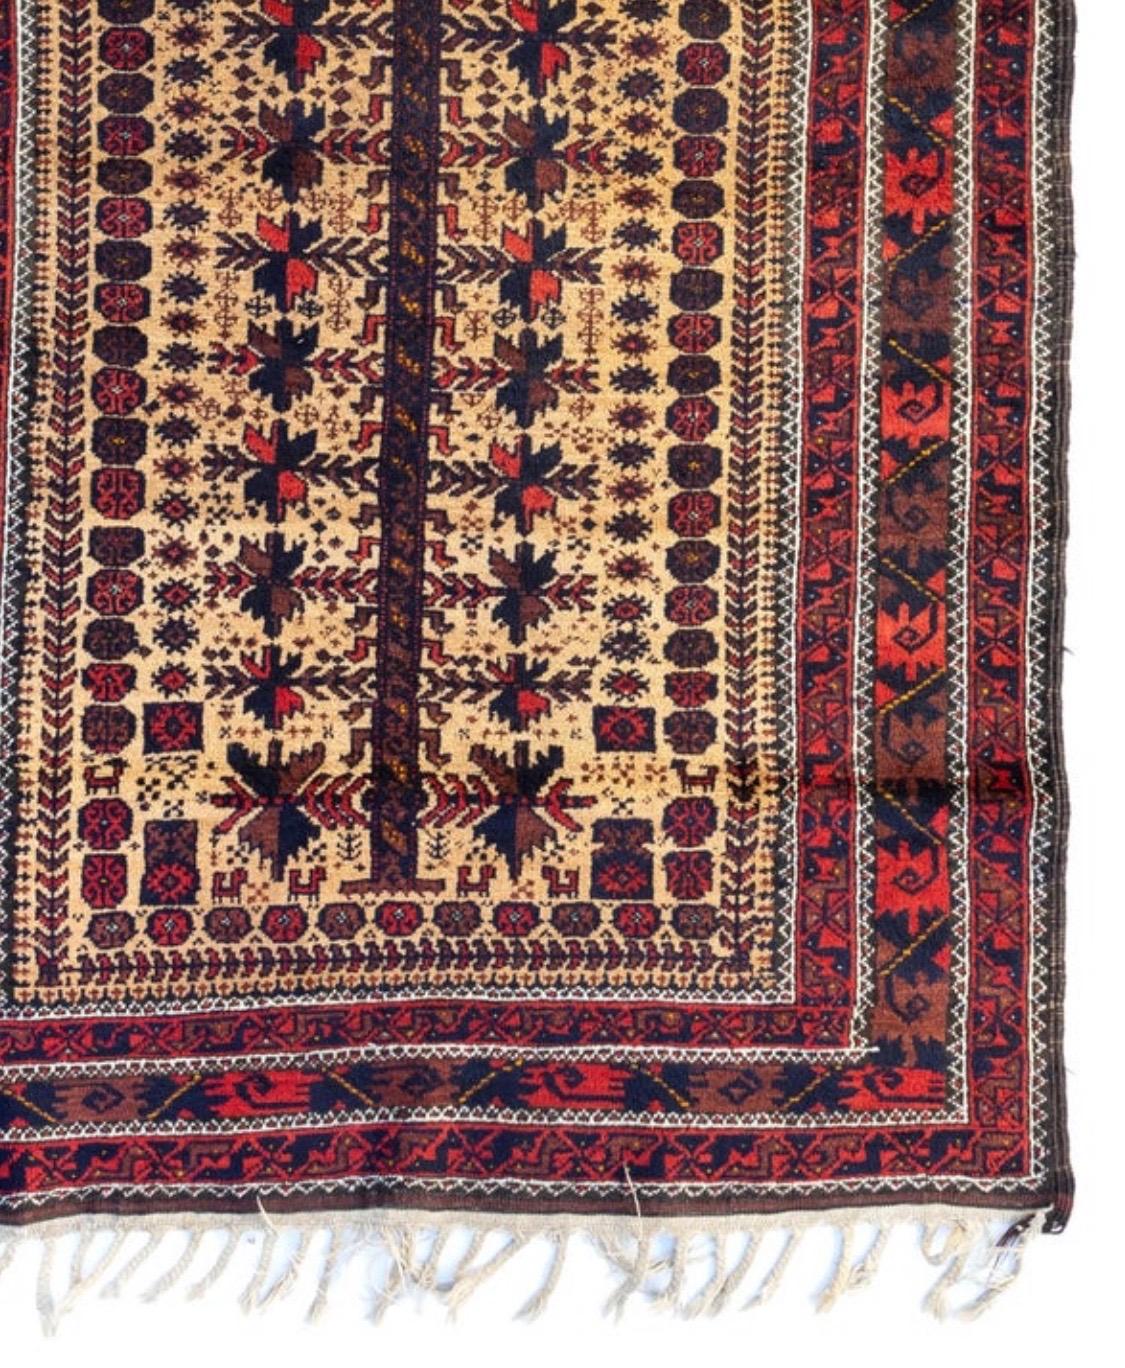 Hand-Woven New Antique Caucasian Red Gold Brown Geometric Tribal Baluch Rug circa 1930s  For Sale